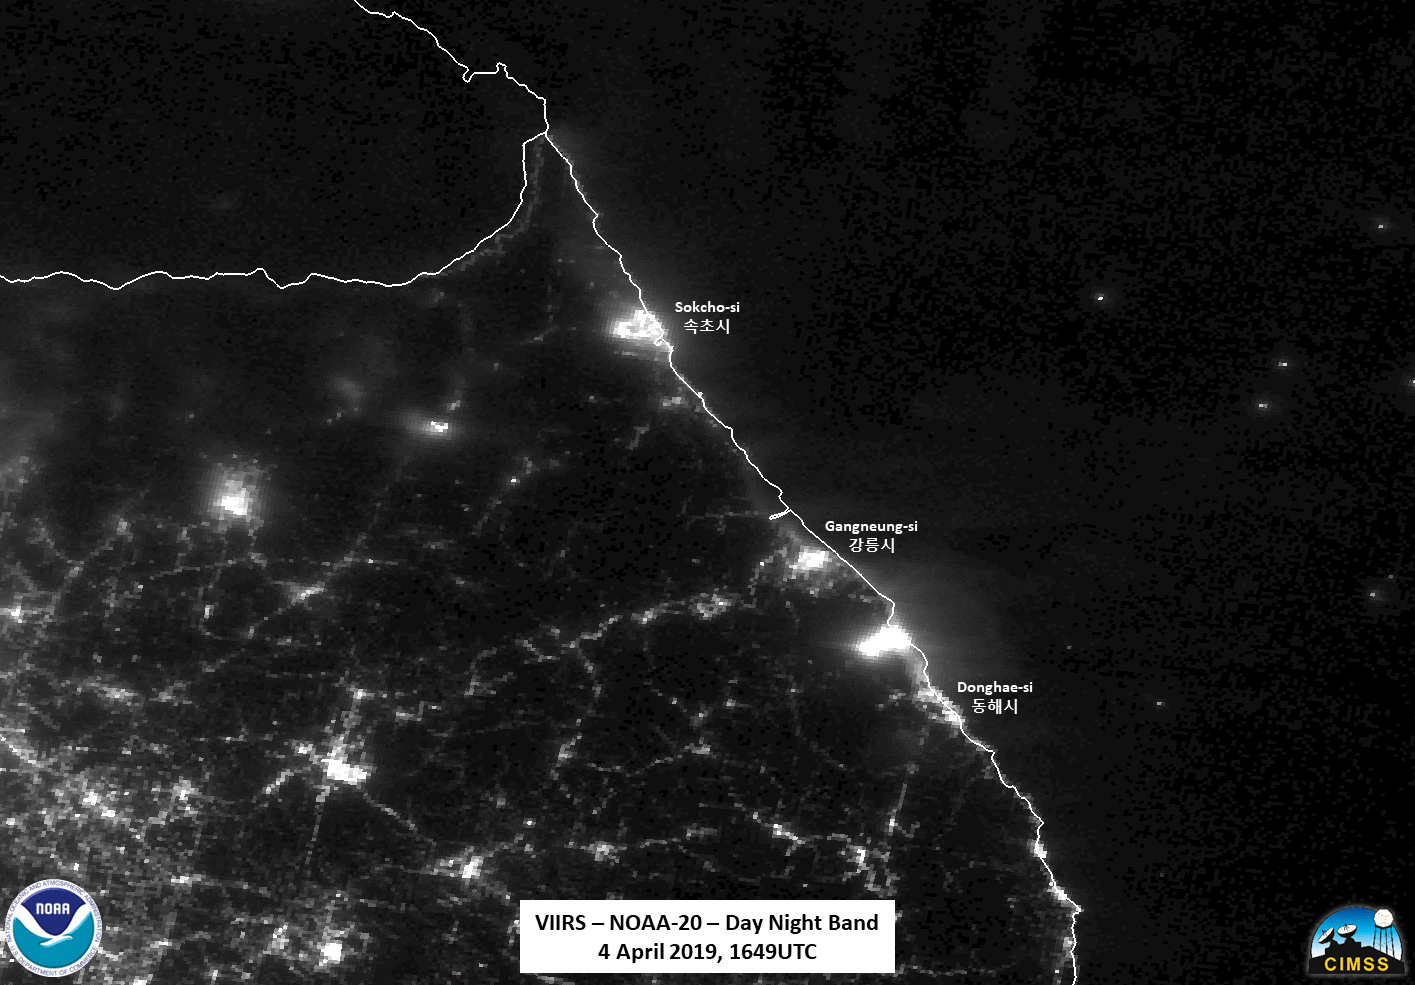 NOAA-20 VIIRS Day/Night Band (0.7 µm), Near-infrared (1.61 µm and 2.24 µm), Shortwave Infrared (3.75 µm and 4.05 µm) and Infrared Window (11.45 µm) images [click to enlarge]